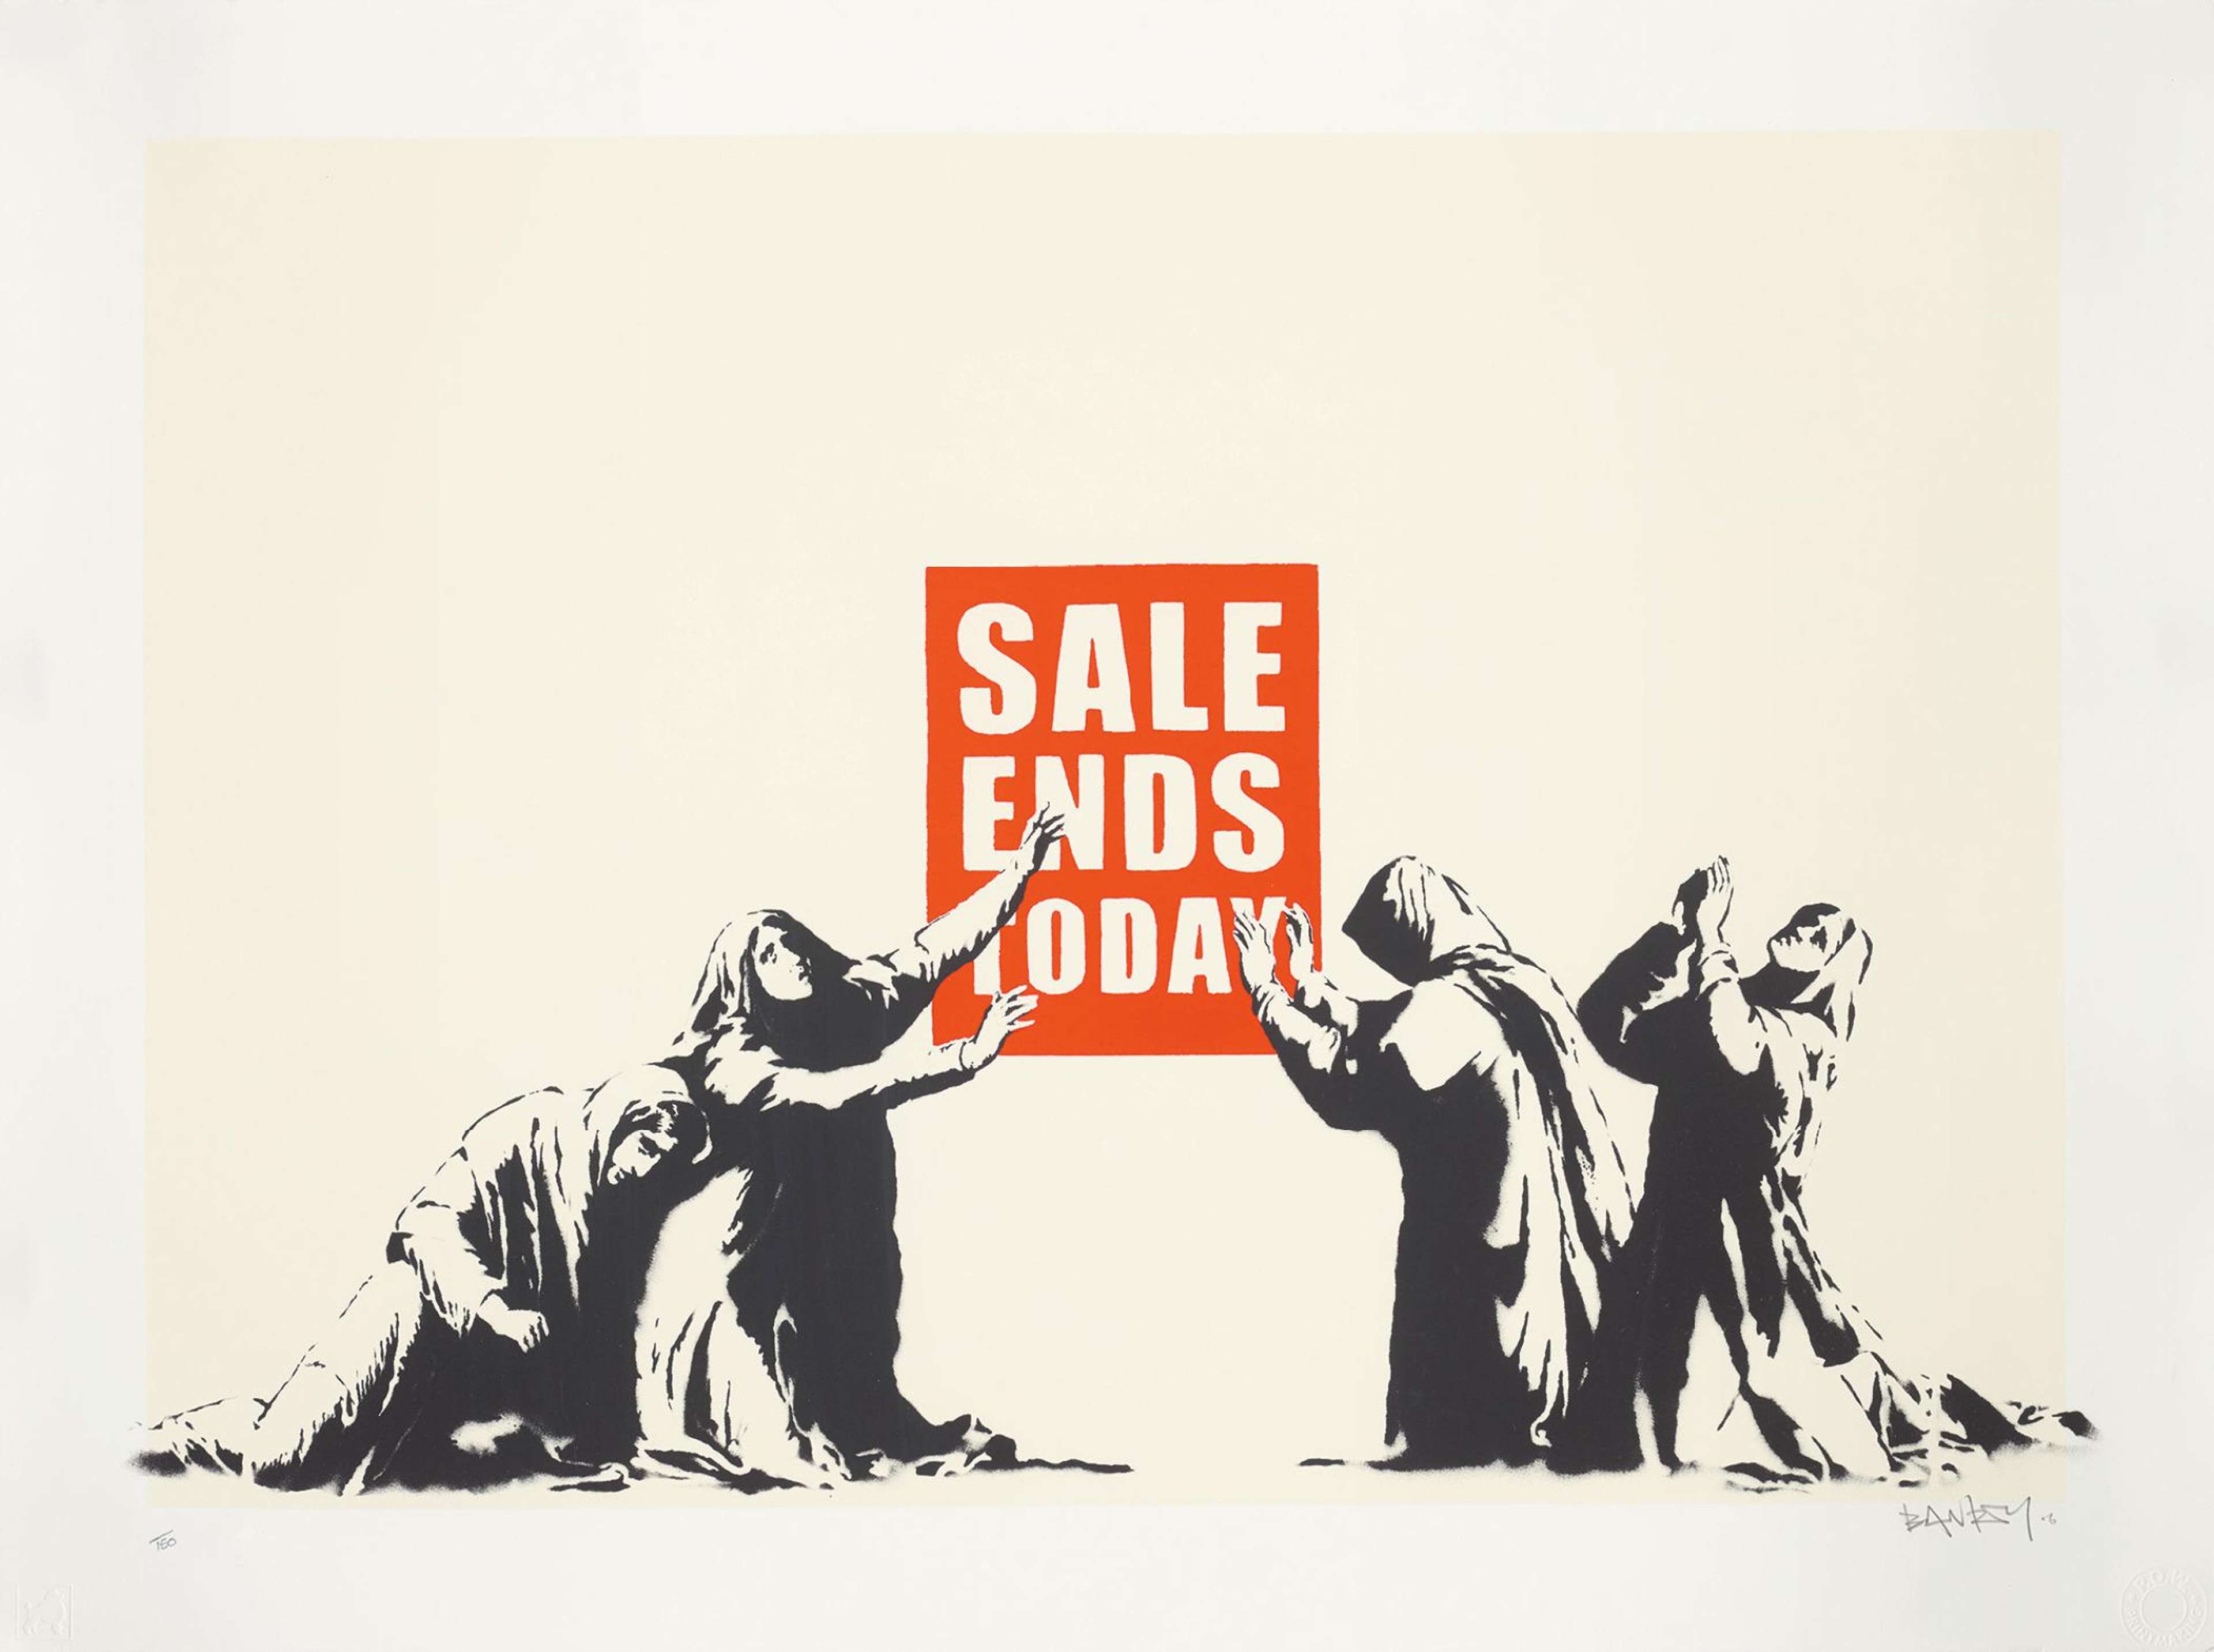 10 Facts About Banksy's Sale Ends